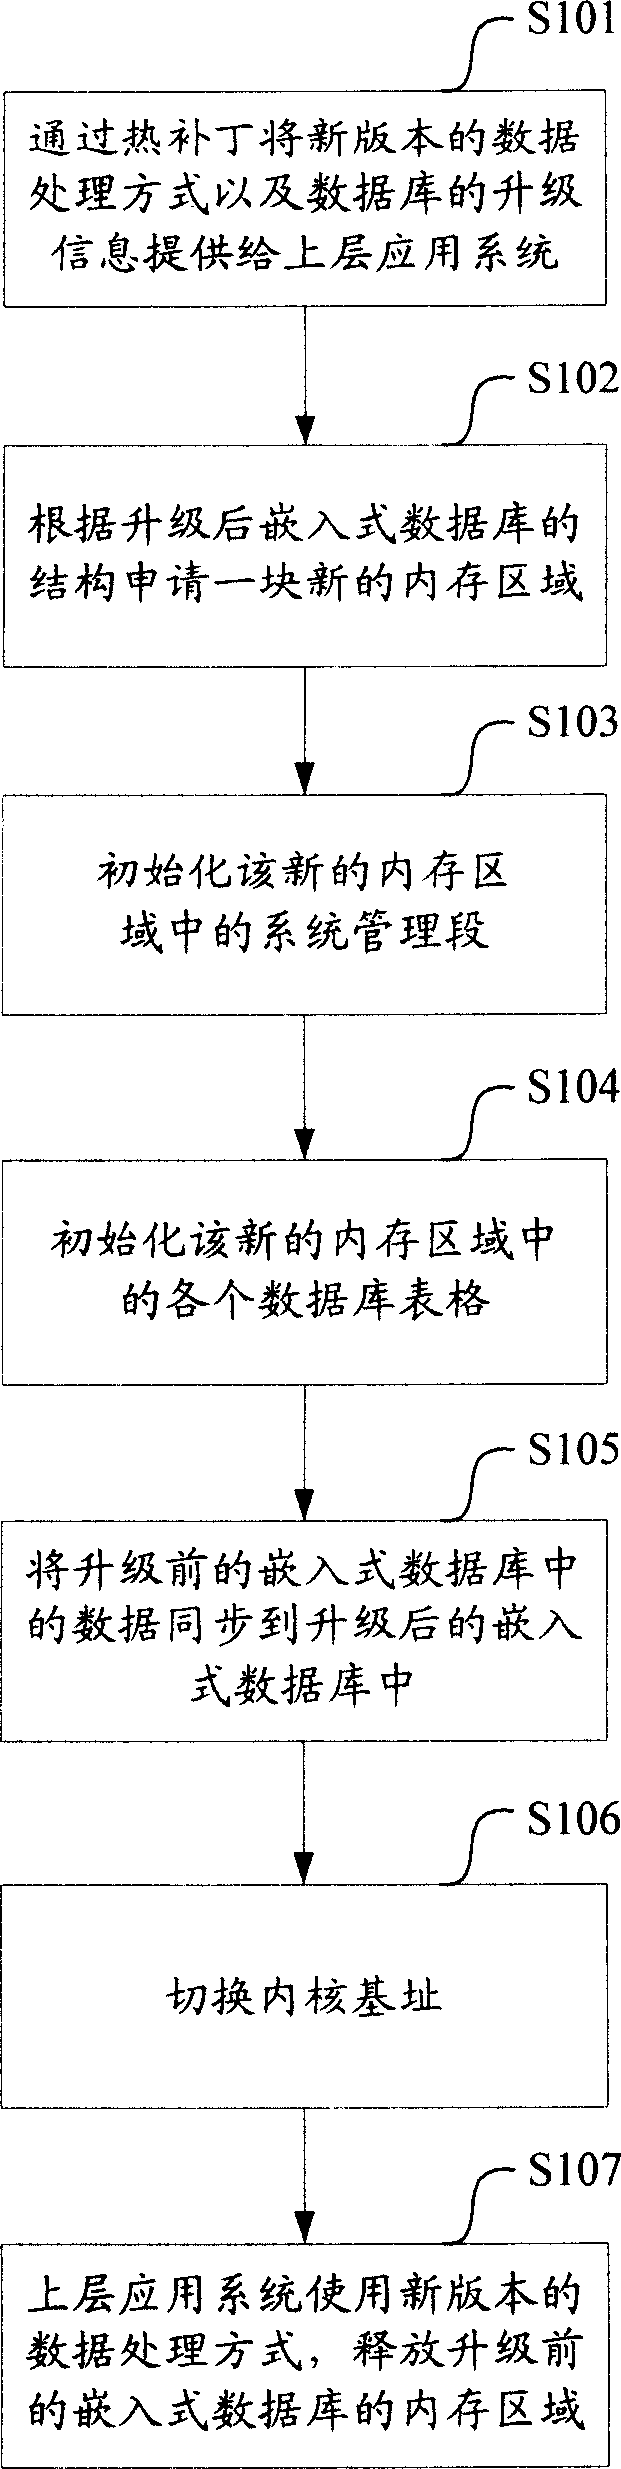 Online updating control method and device of embedded database